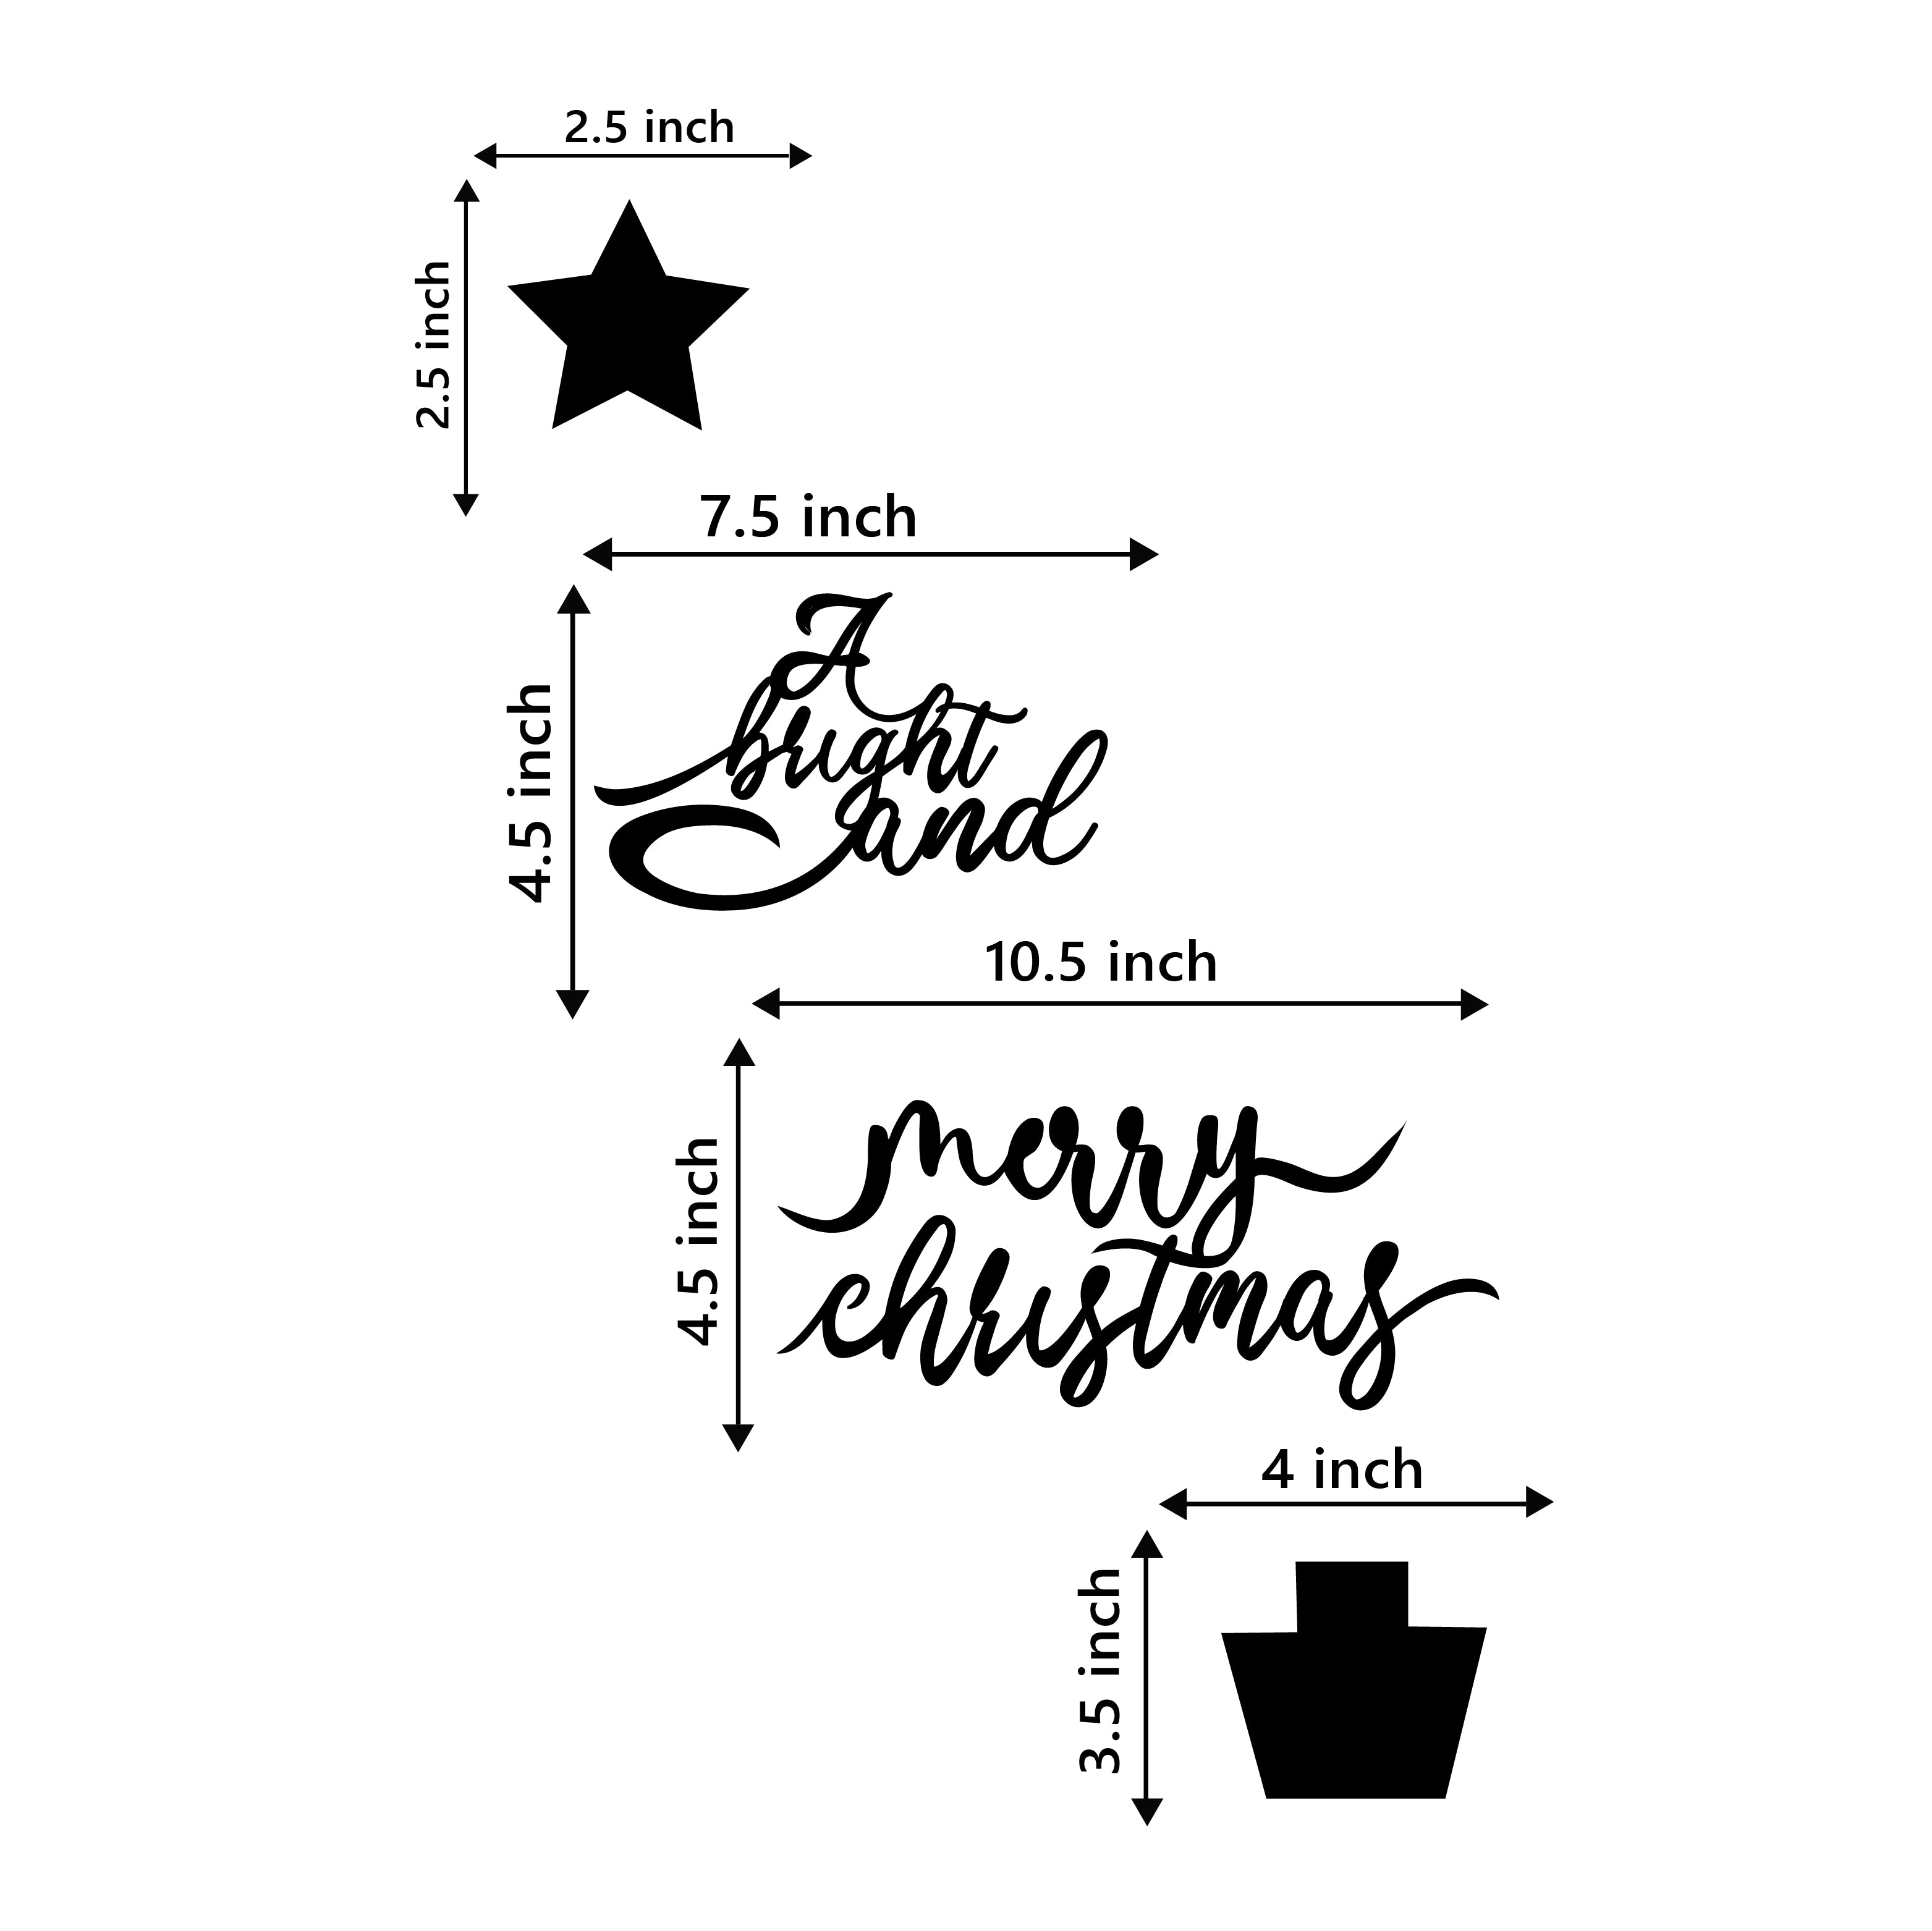 "A Bright and Merry Christmas" Black Engineered Wood Wall Art Cutout, Ready to Hang Home Decor 3